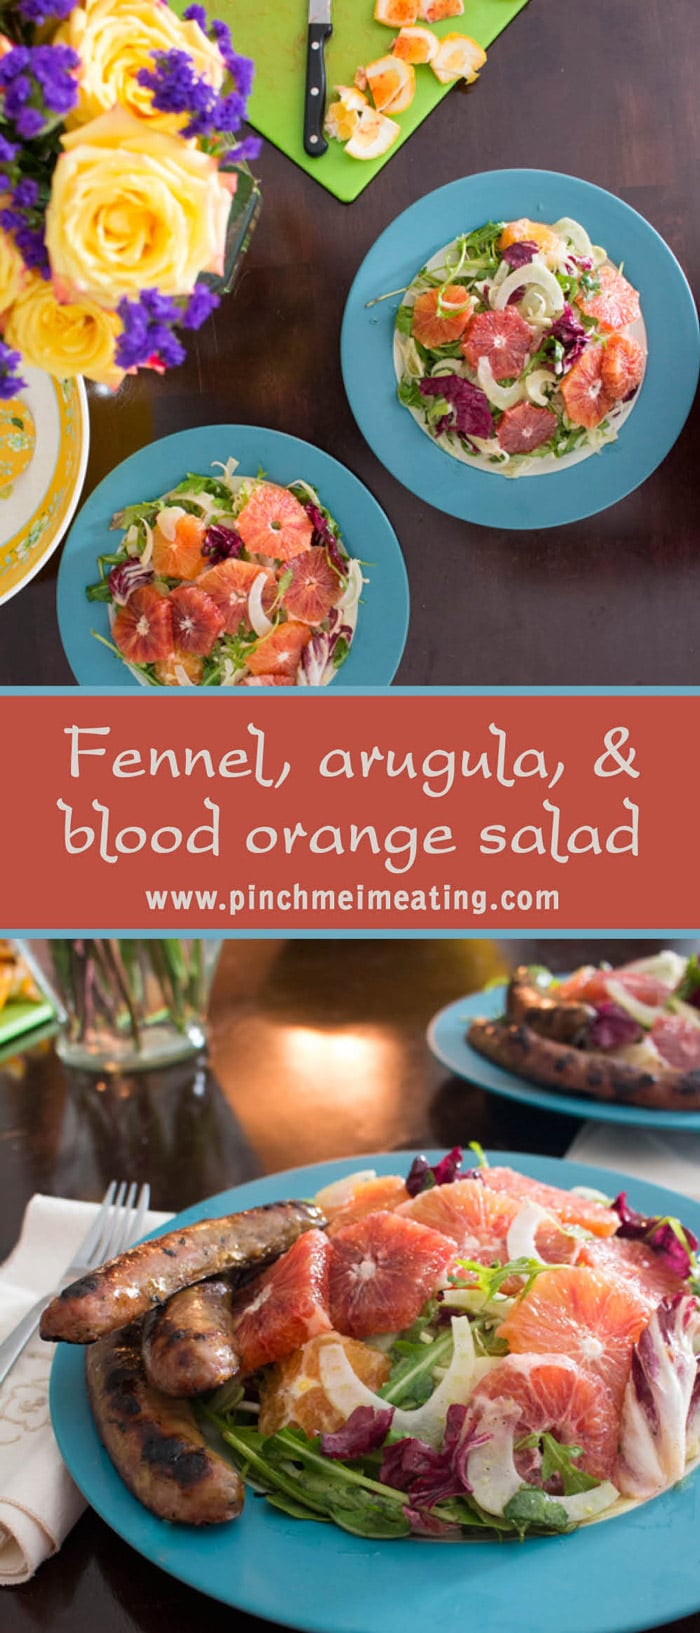 This fennel blood orange salad with arugula is fresh and healthy with peppery greens, crunchy fennel bulbs, and sweet, juicy blood oranges tossed in a simple vinaigrette. Great for clean eating! Make it a full meal with some added chicken sausage!